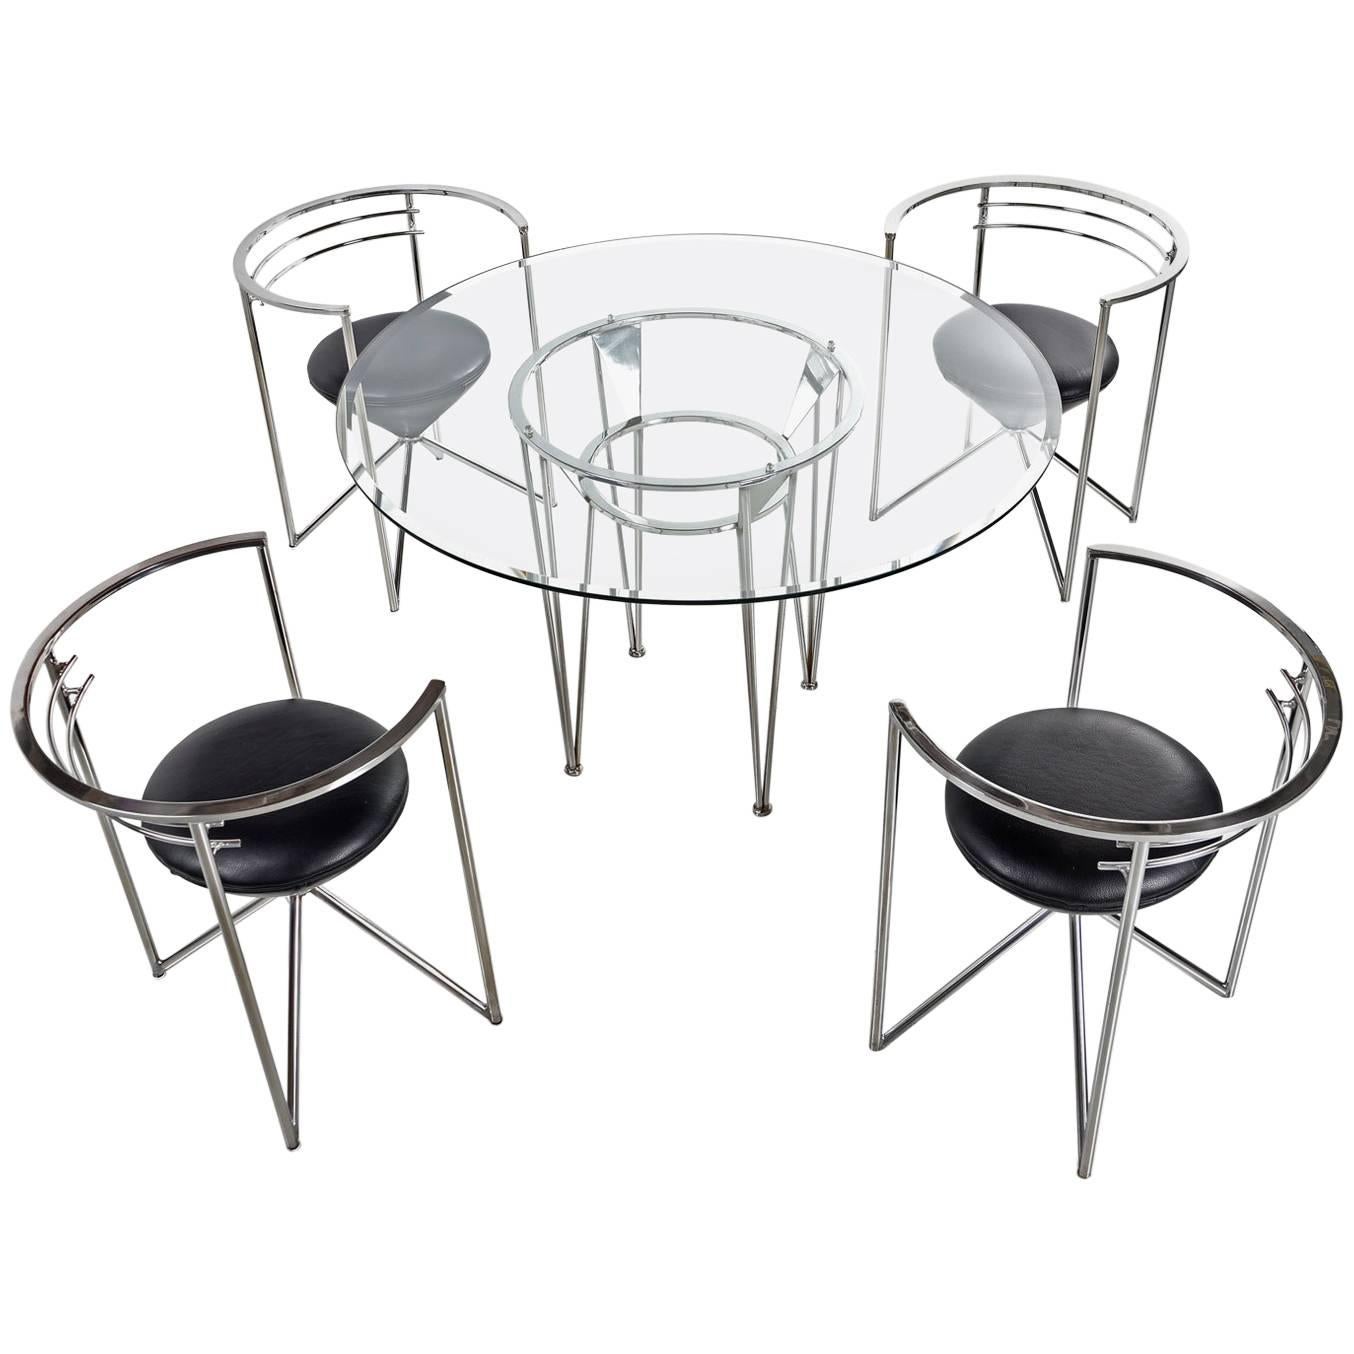 1980s Chrome and Glass Art Deco Modern Dining Set by Minson of CA, New Leather